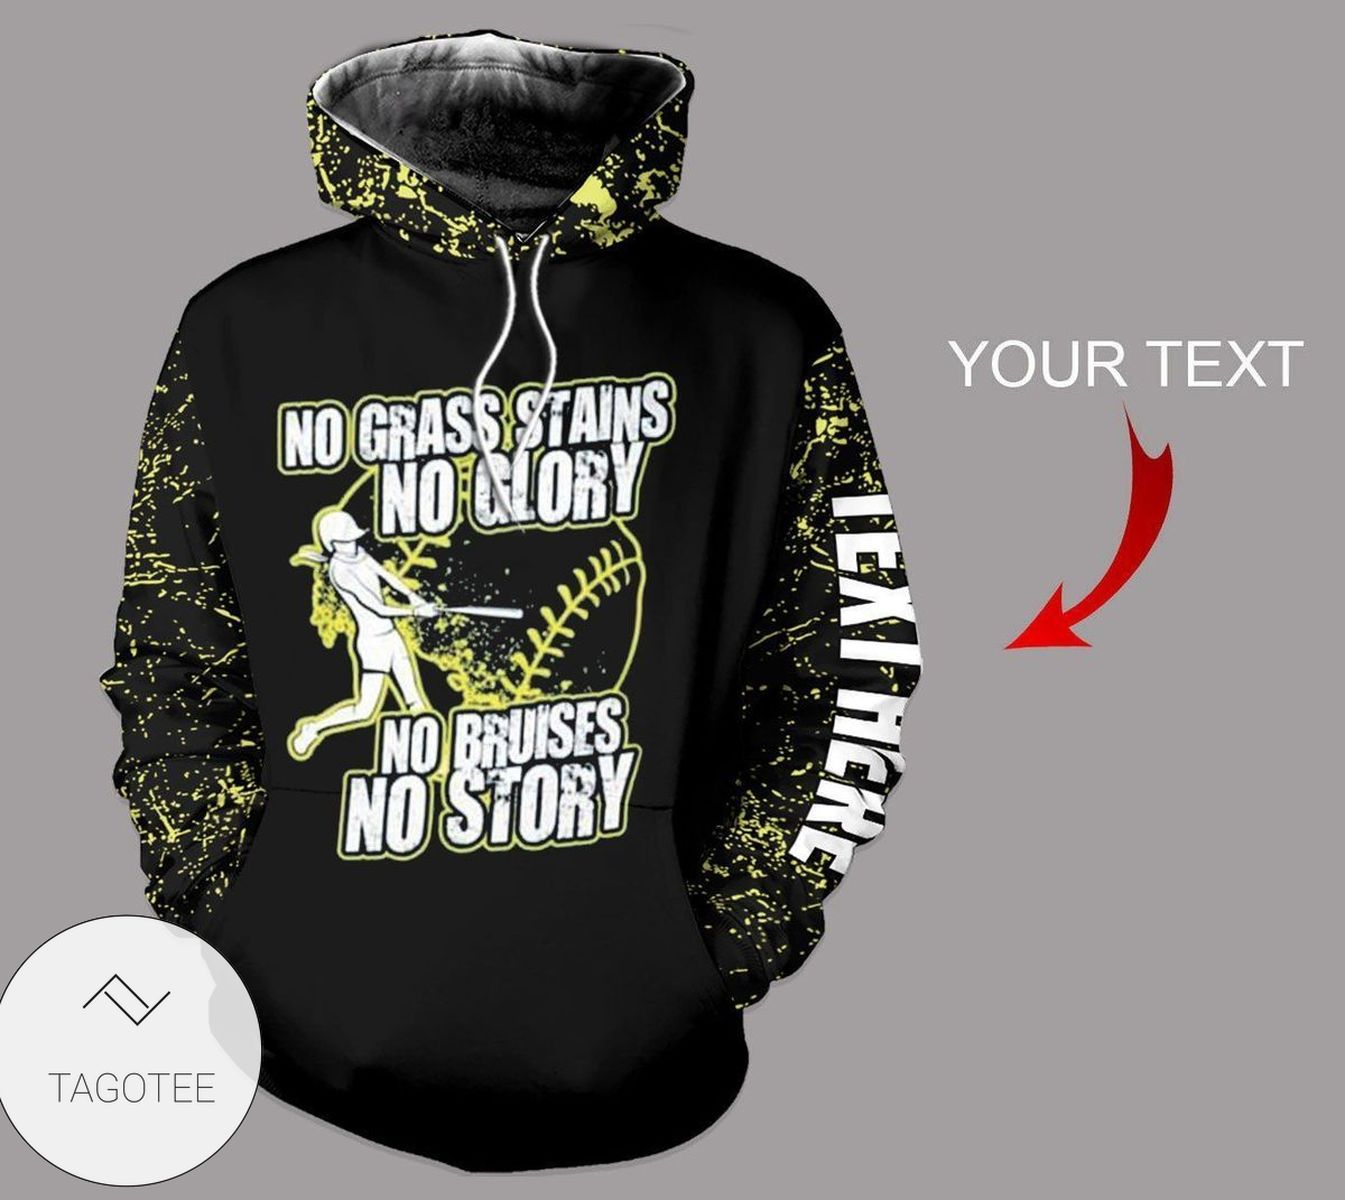 Personalized Name No Grass Stains No Glory No Bruises No Story Hoodie